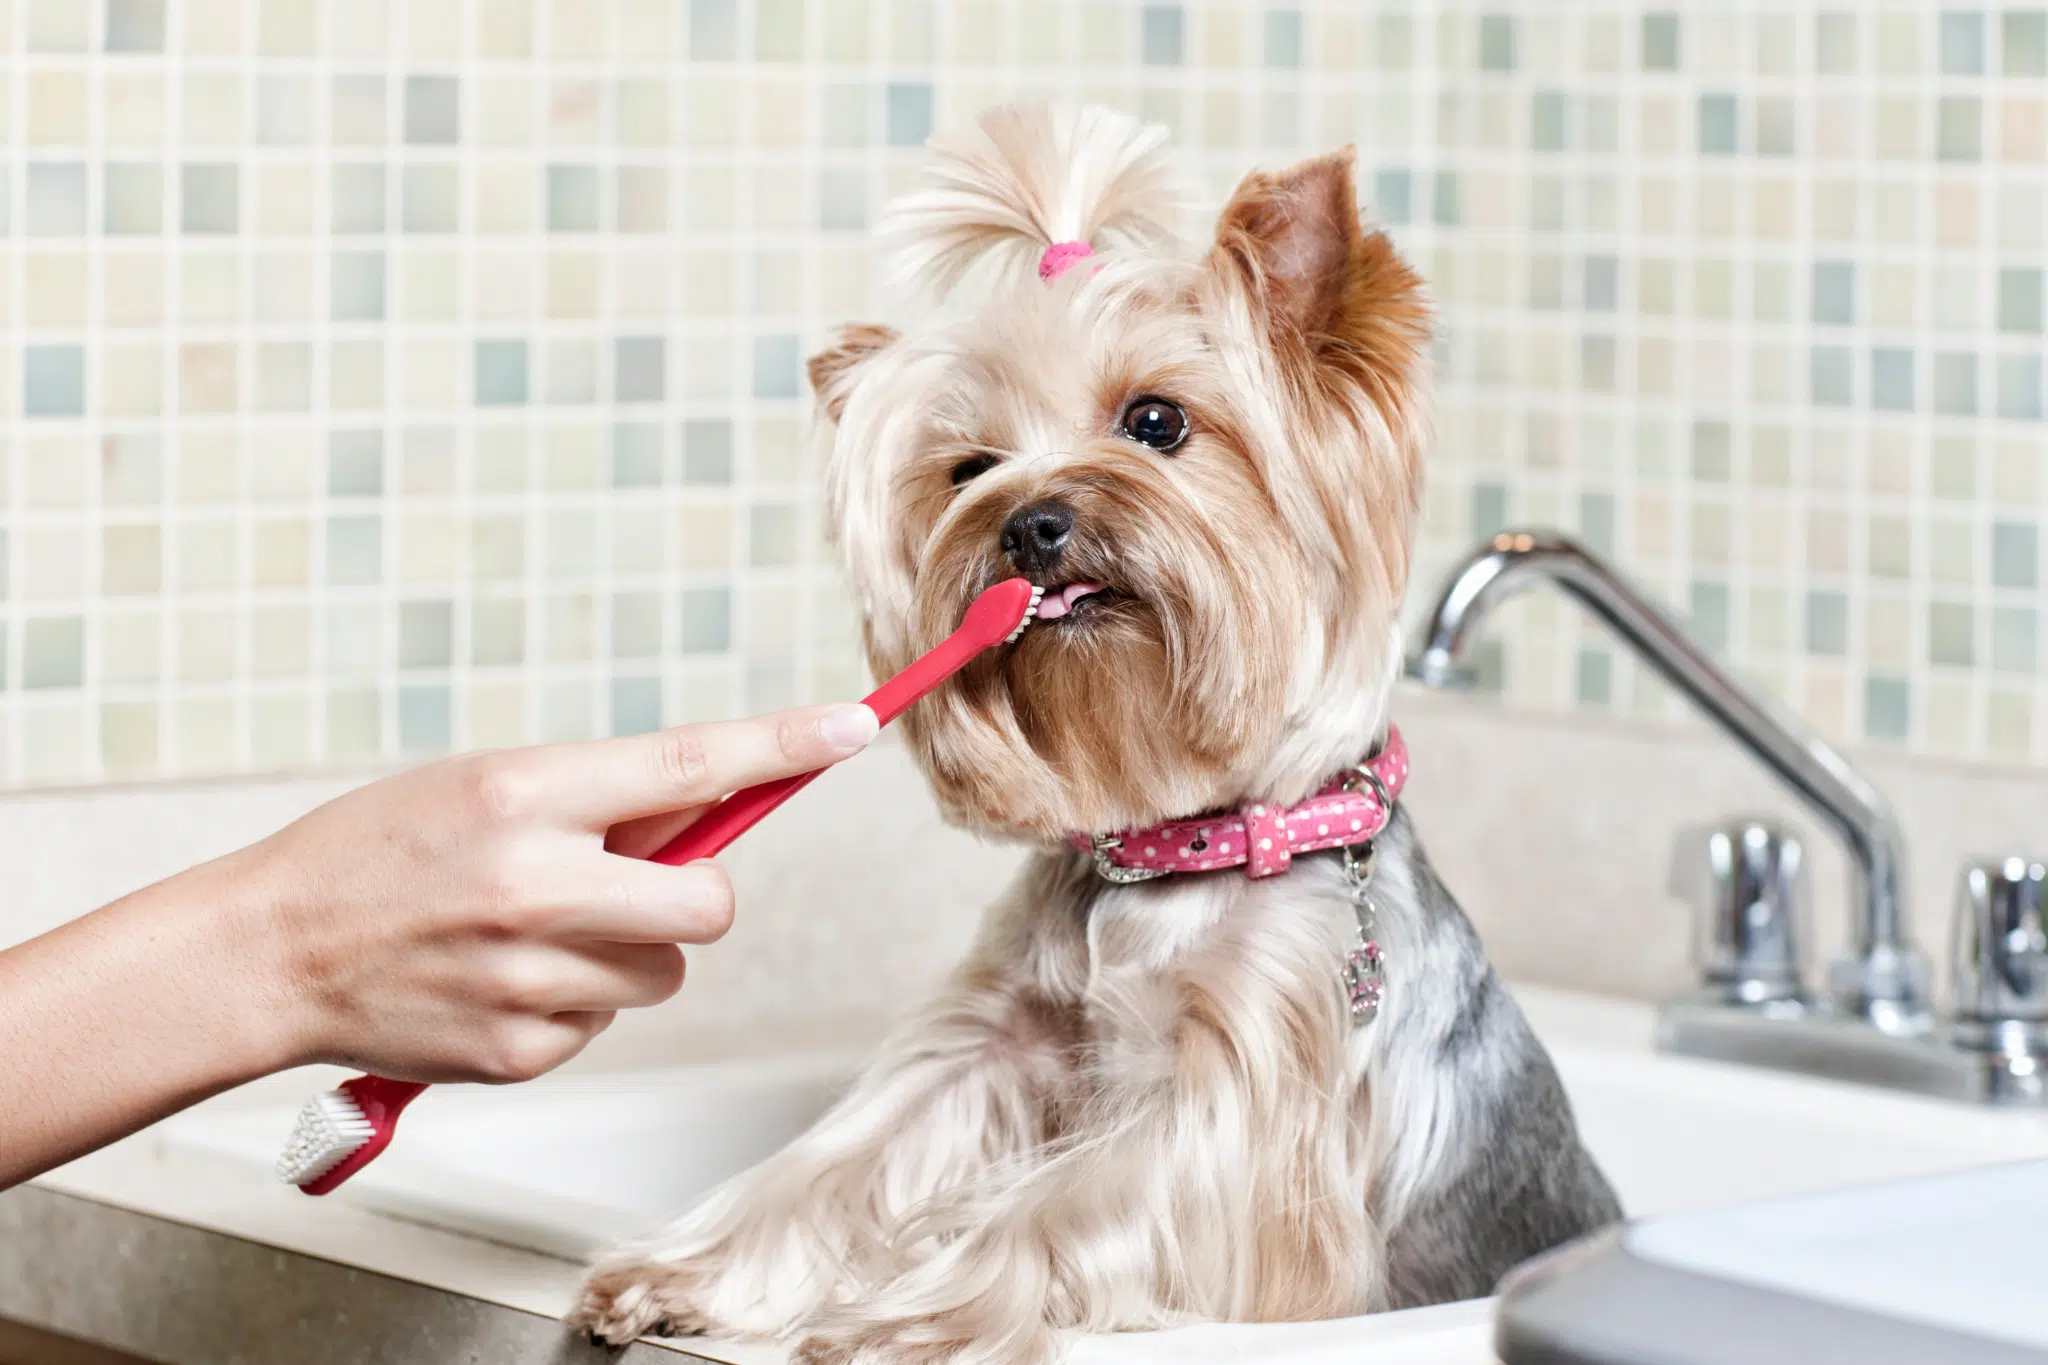 A dog being bathed and groomed by a professional groomer